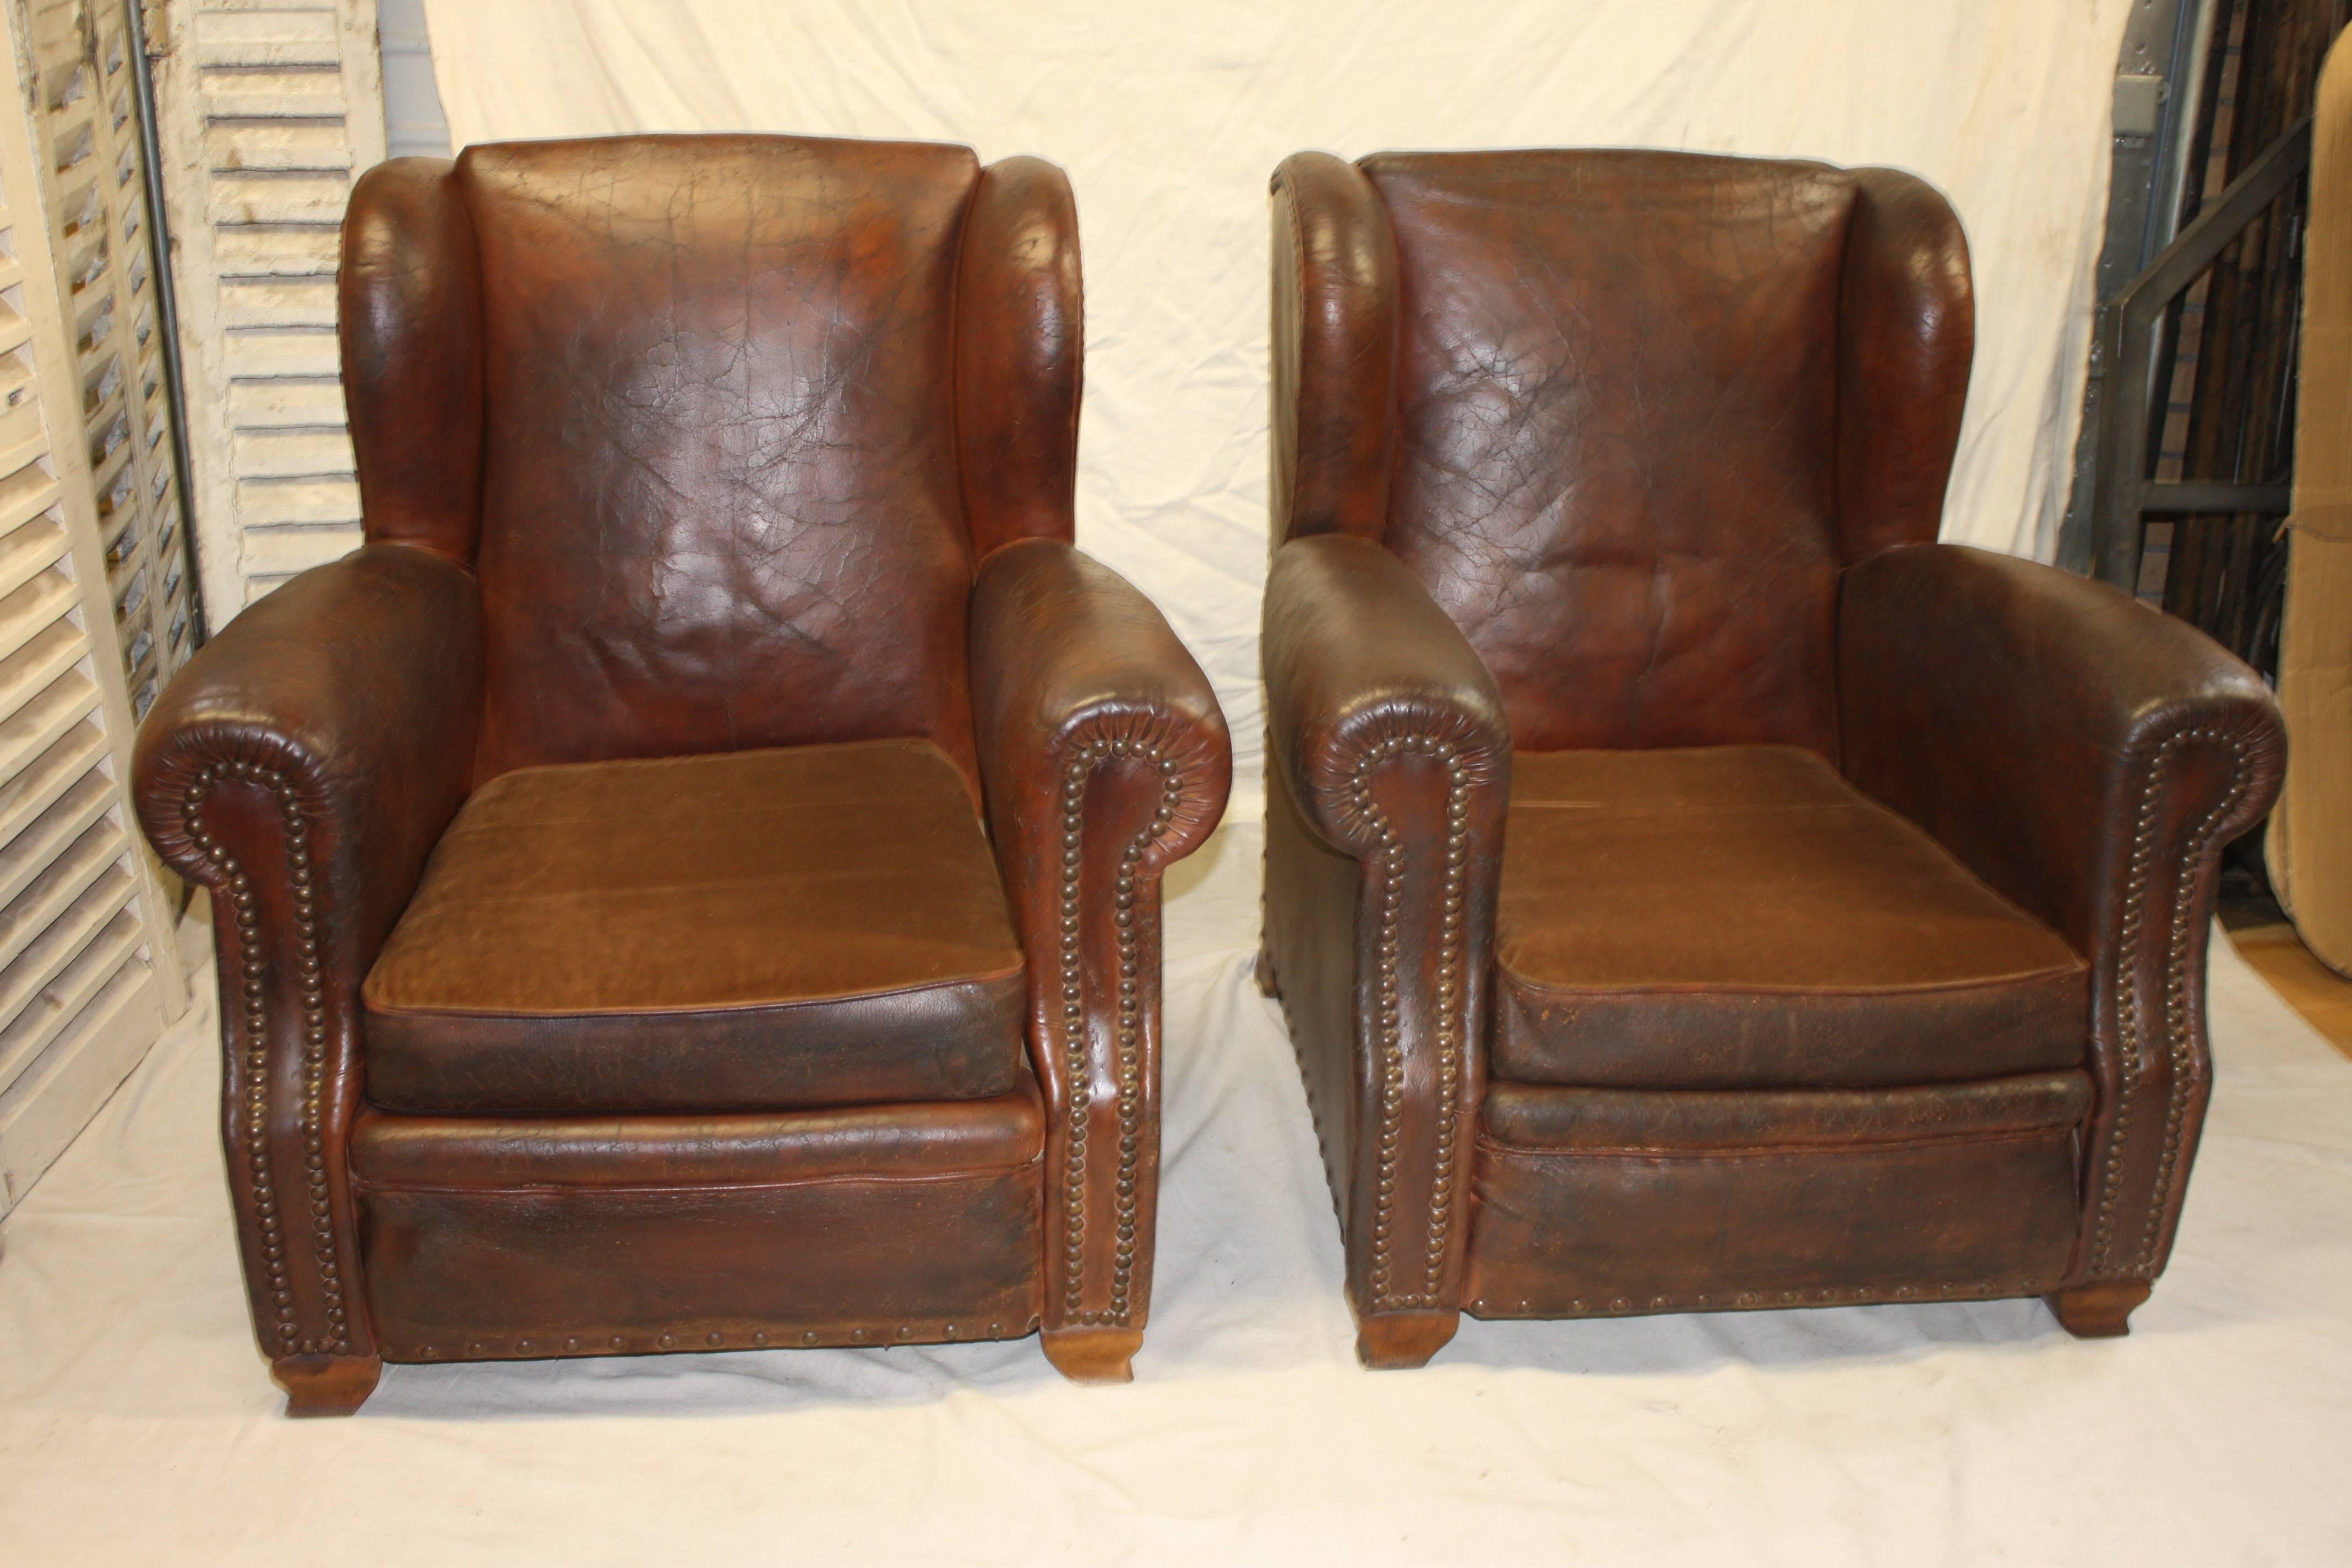 Pair of 19th century French leather club chairs.